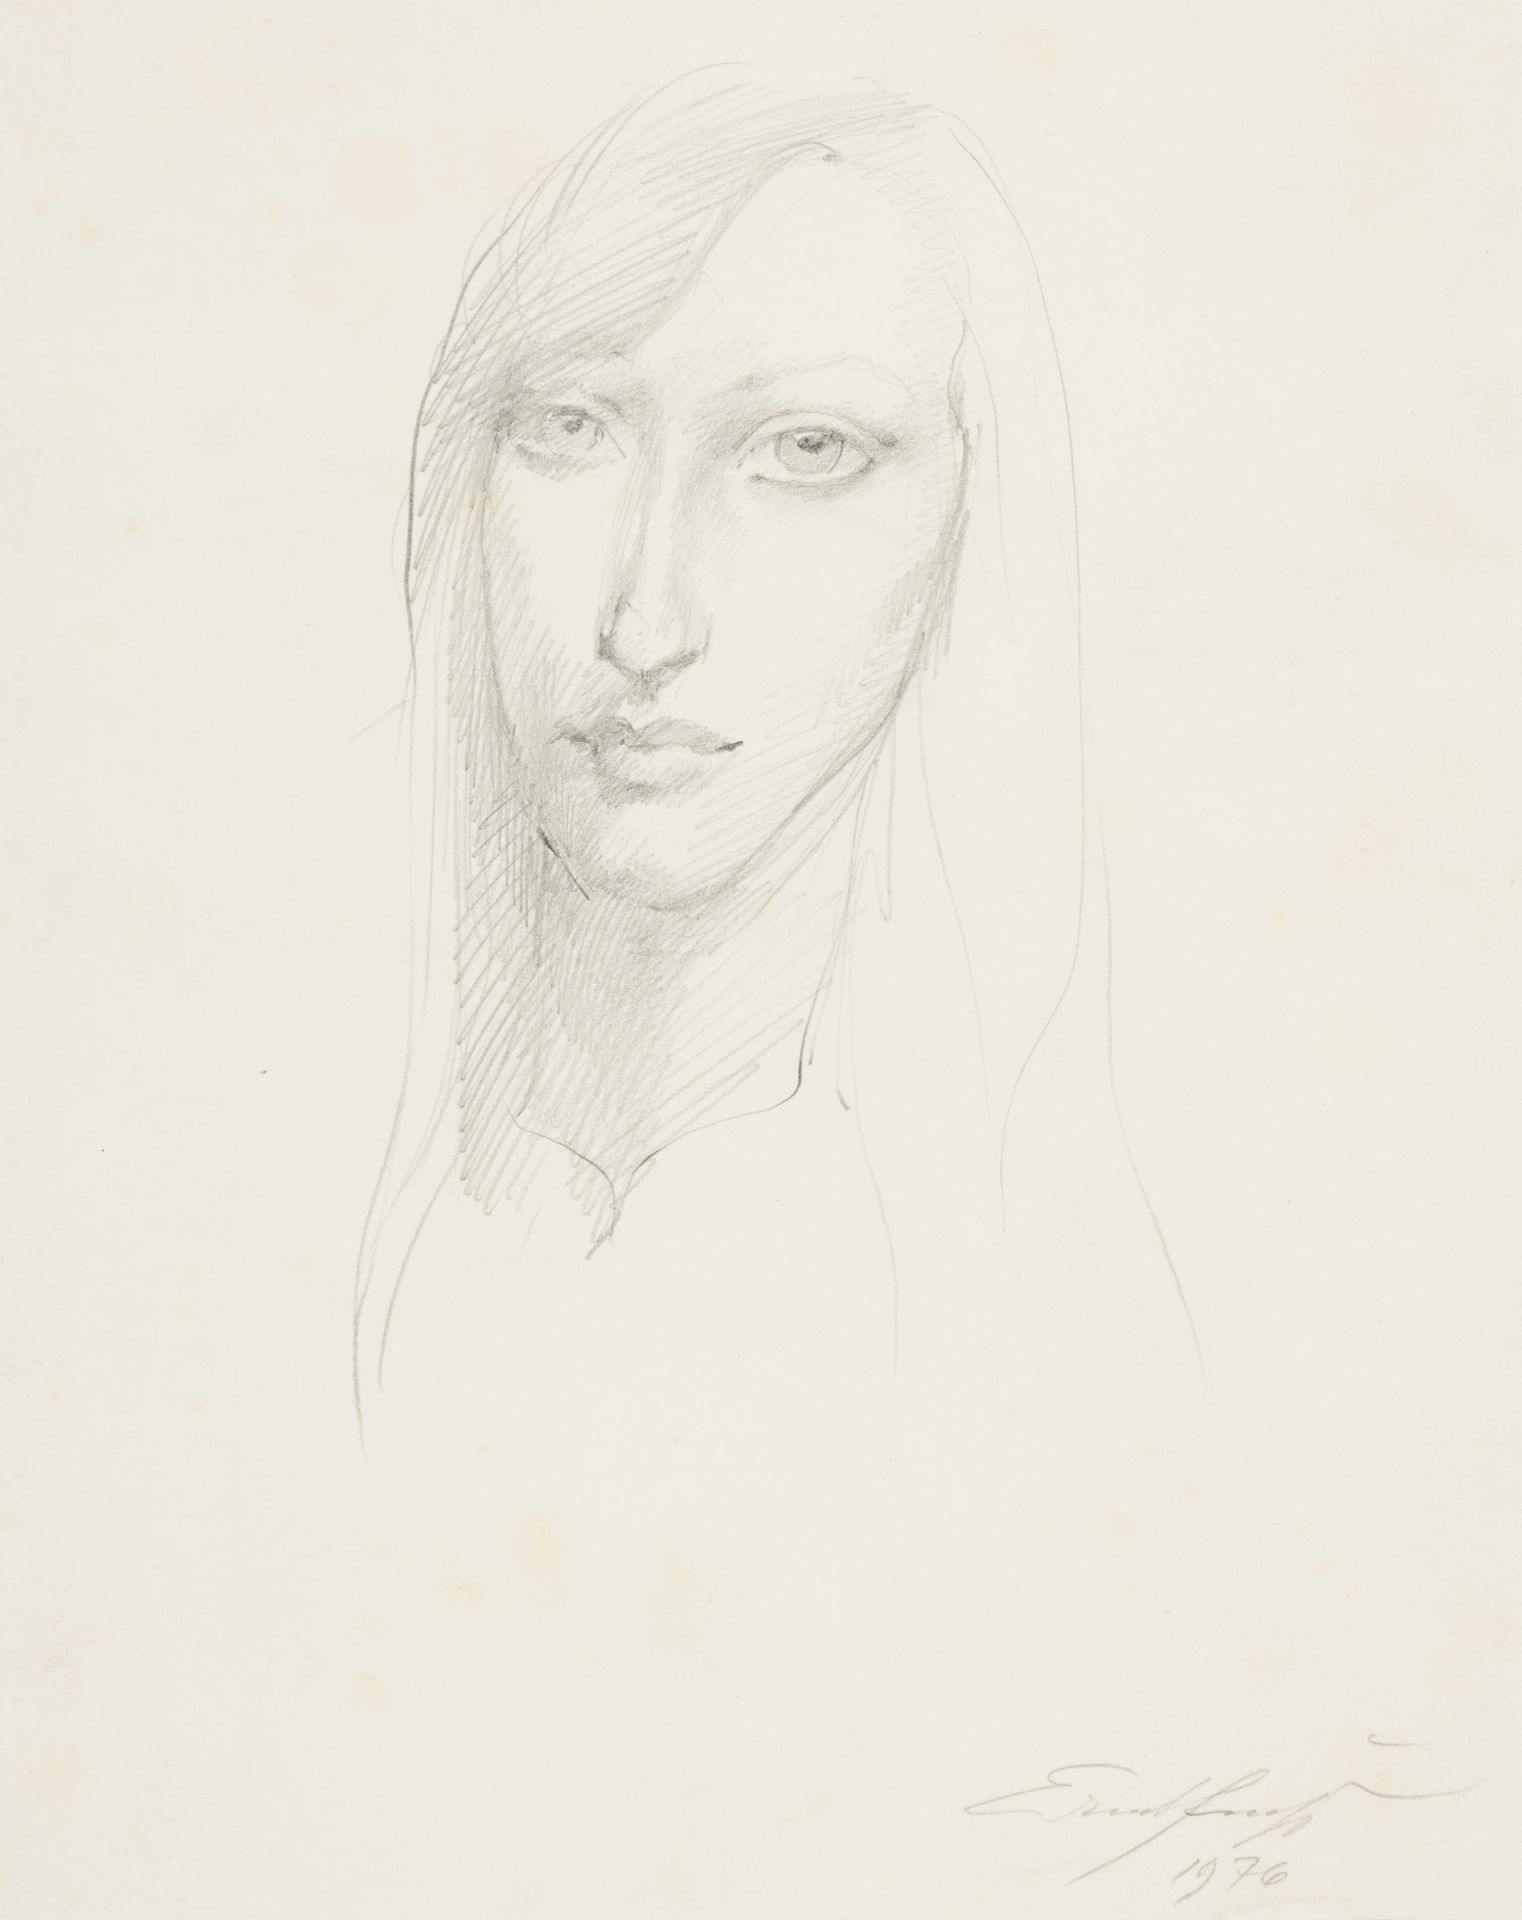 Fuchs, Ernst Portrait, 1976
Graphite on paper
Signed and dated lower right
mount&hellip;